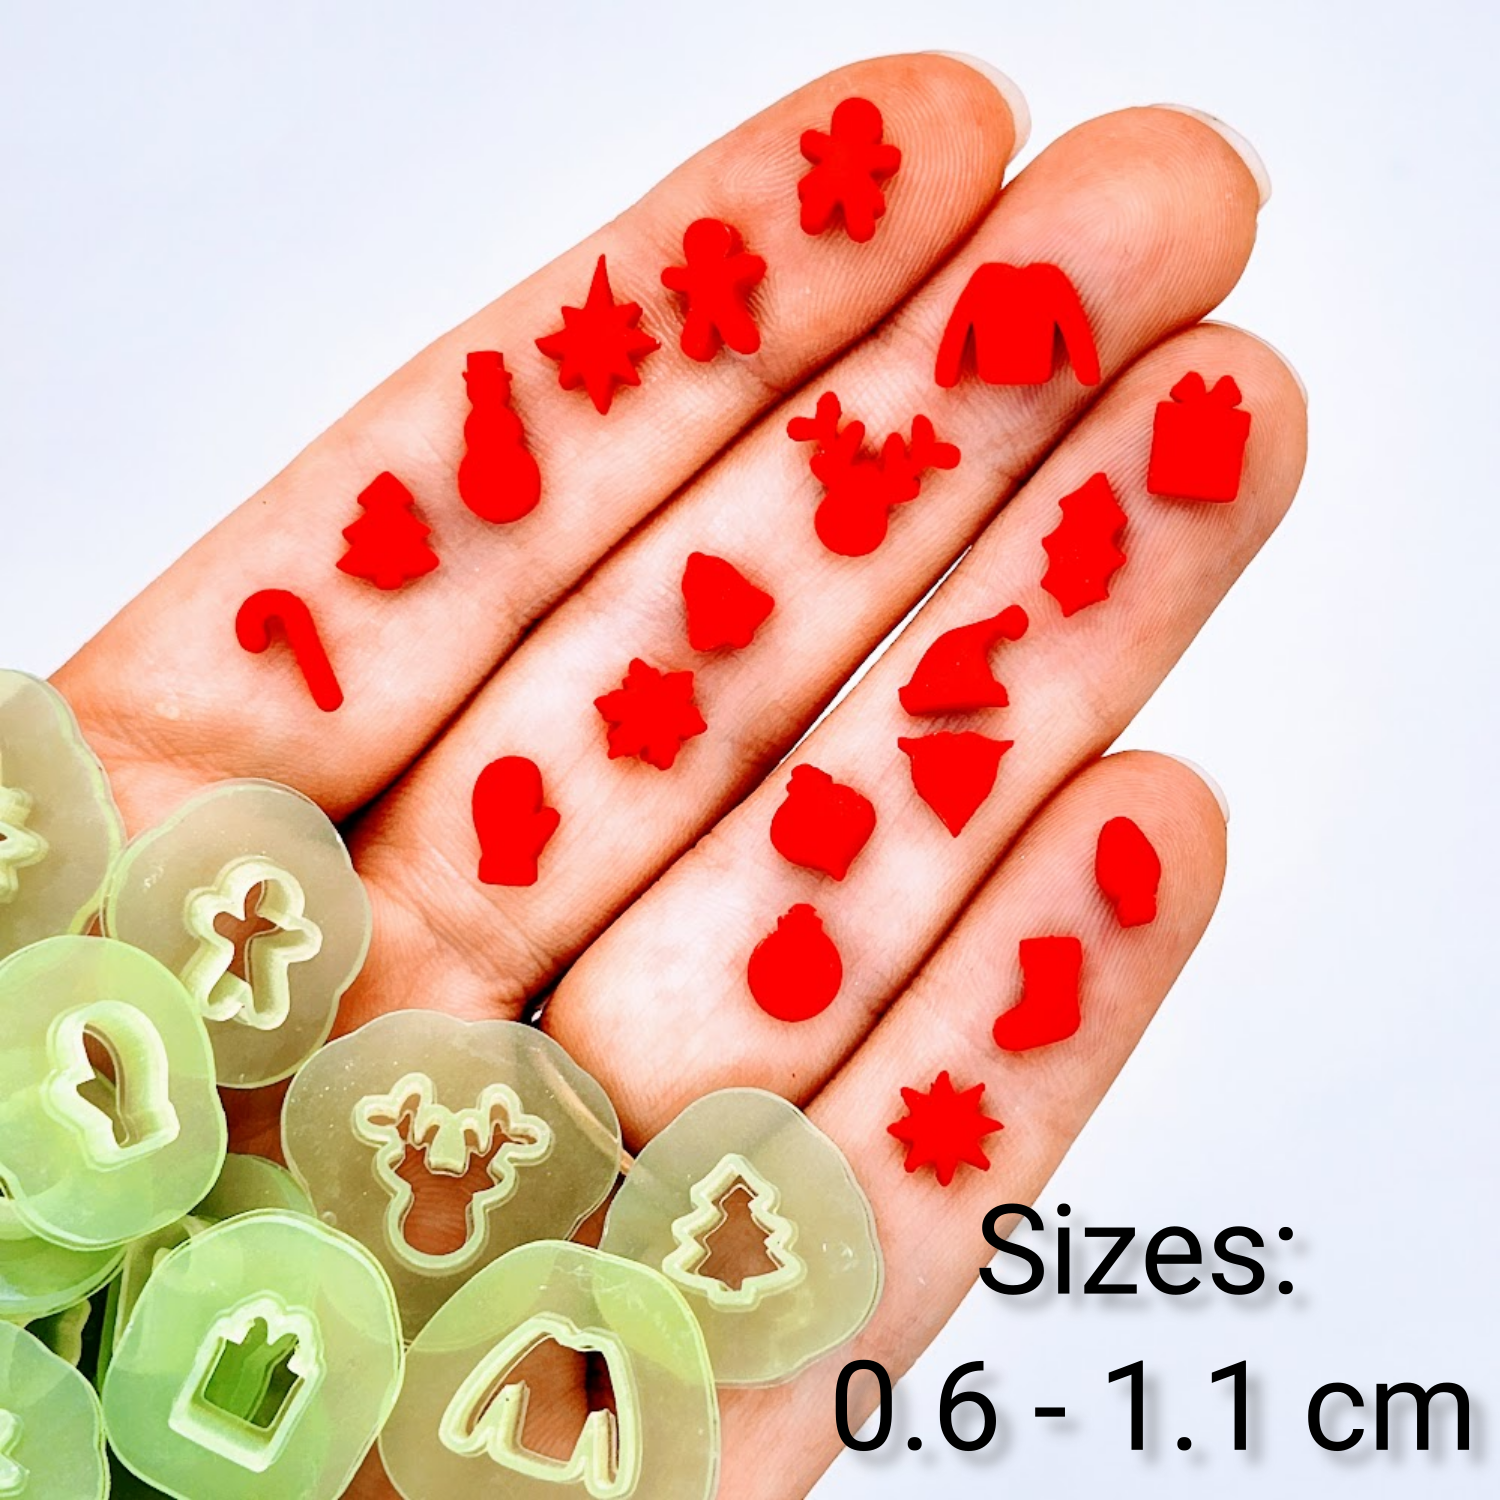 Set of Tiny Spring Polymer Clay Cutters  Sharp, Clean, Precise Cuts – The  Clay Impress